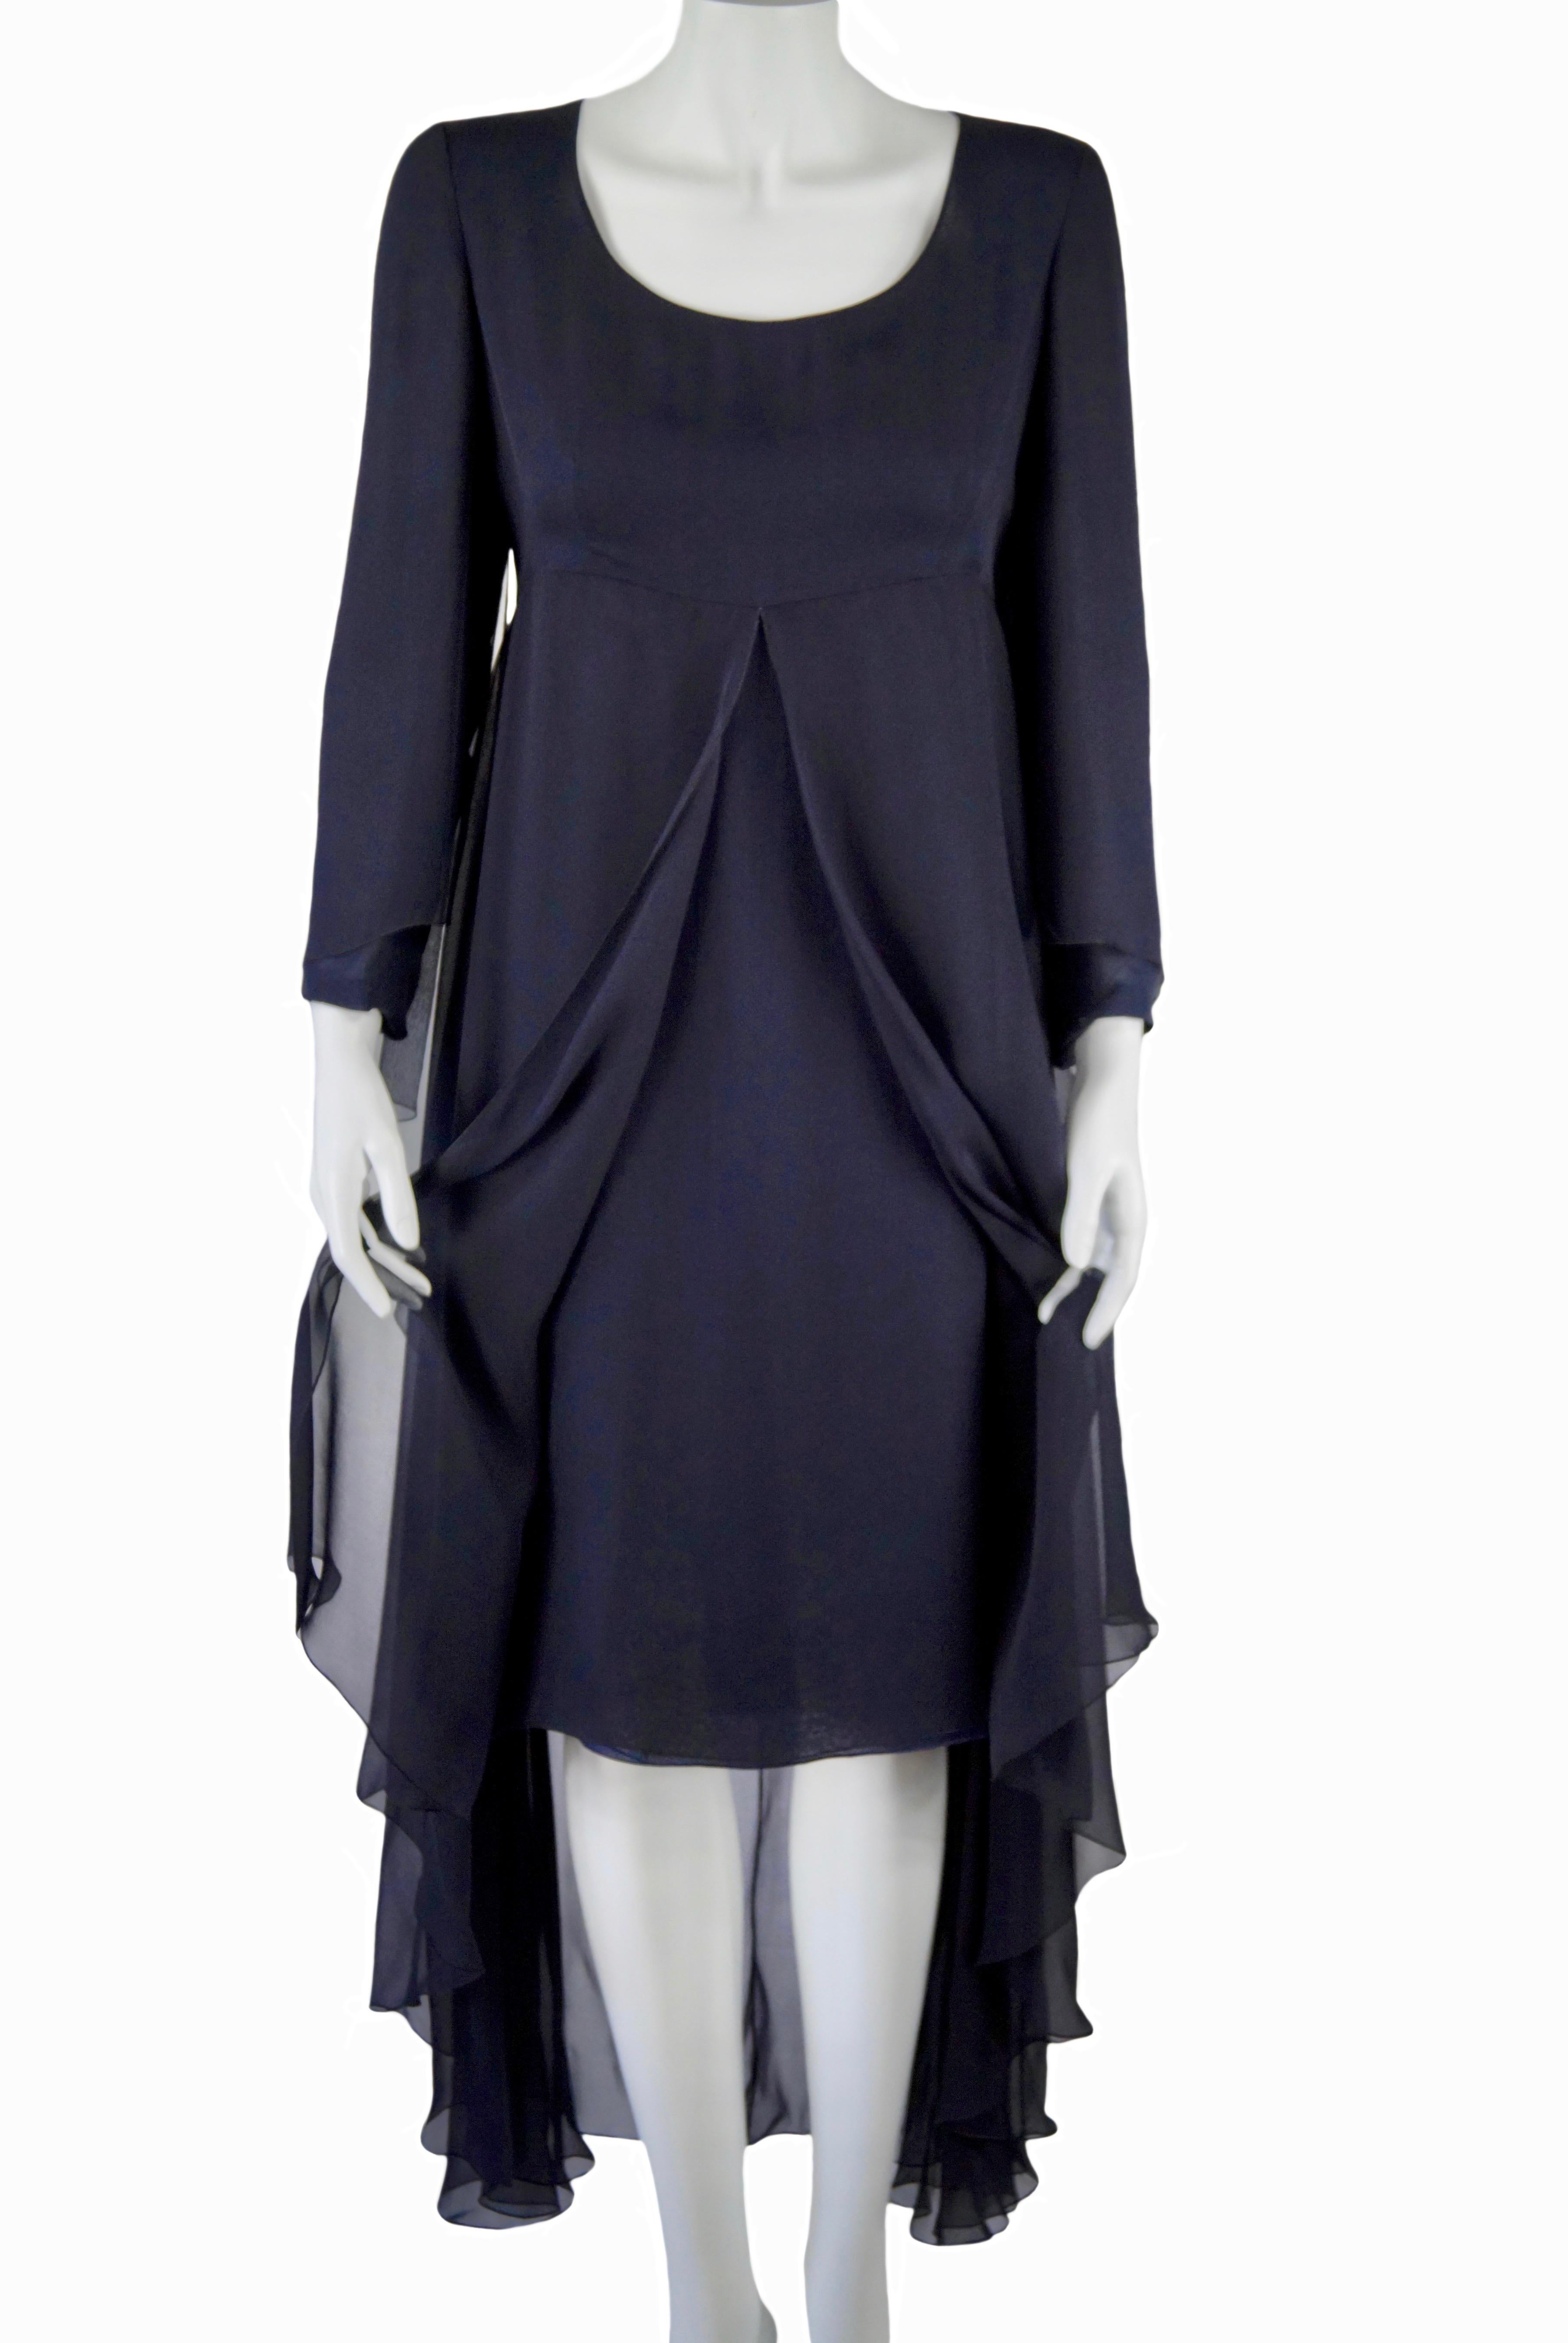 CHANEL Cruise Collection 2002
Multi-layered midnight blue silk voile cocktail dress. 
Empire style décolleté with large layered drapery, asymmetrical, long sleeves with free flounces. Back zip.
Size FR 40
Made in France
100% silk
100% silk